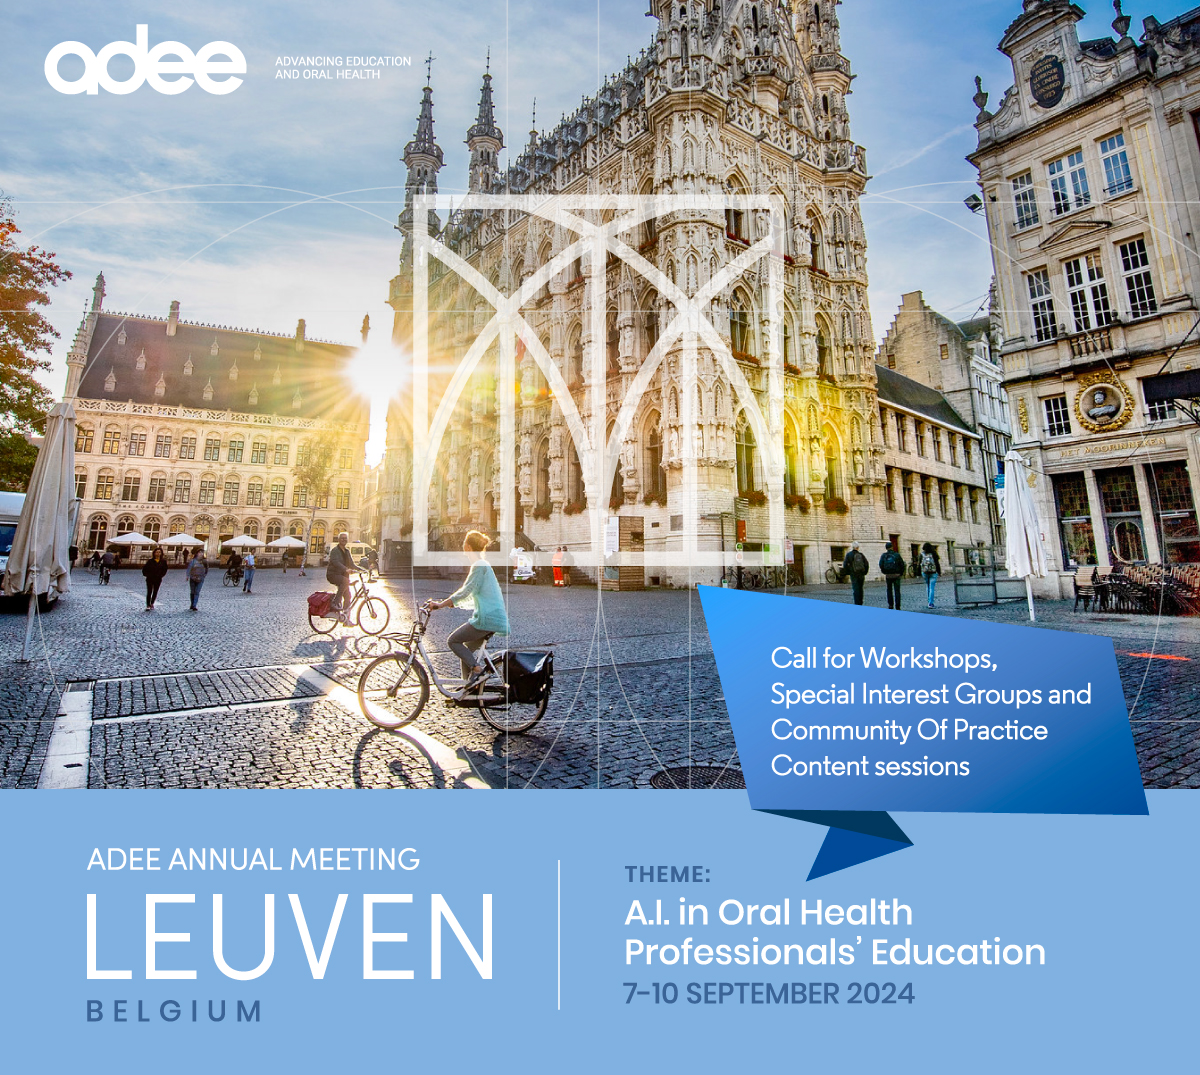 Our November Newsletter is available here: adee.org/november-2023. We invite Chairs of COPs, SIGs and others interested to submit abstract proposals for our meeting programme to administrator@adee.org until 5 Jan 2024. #Adee #Leuven2024 #AdeeAnnualMeeting